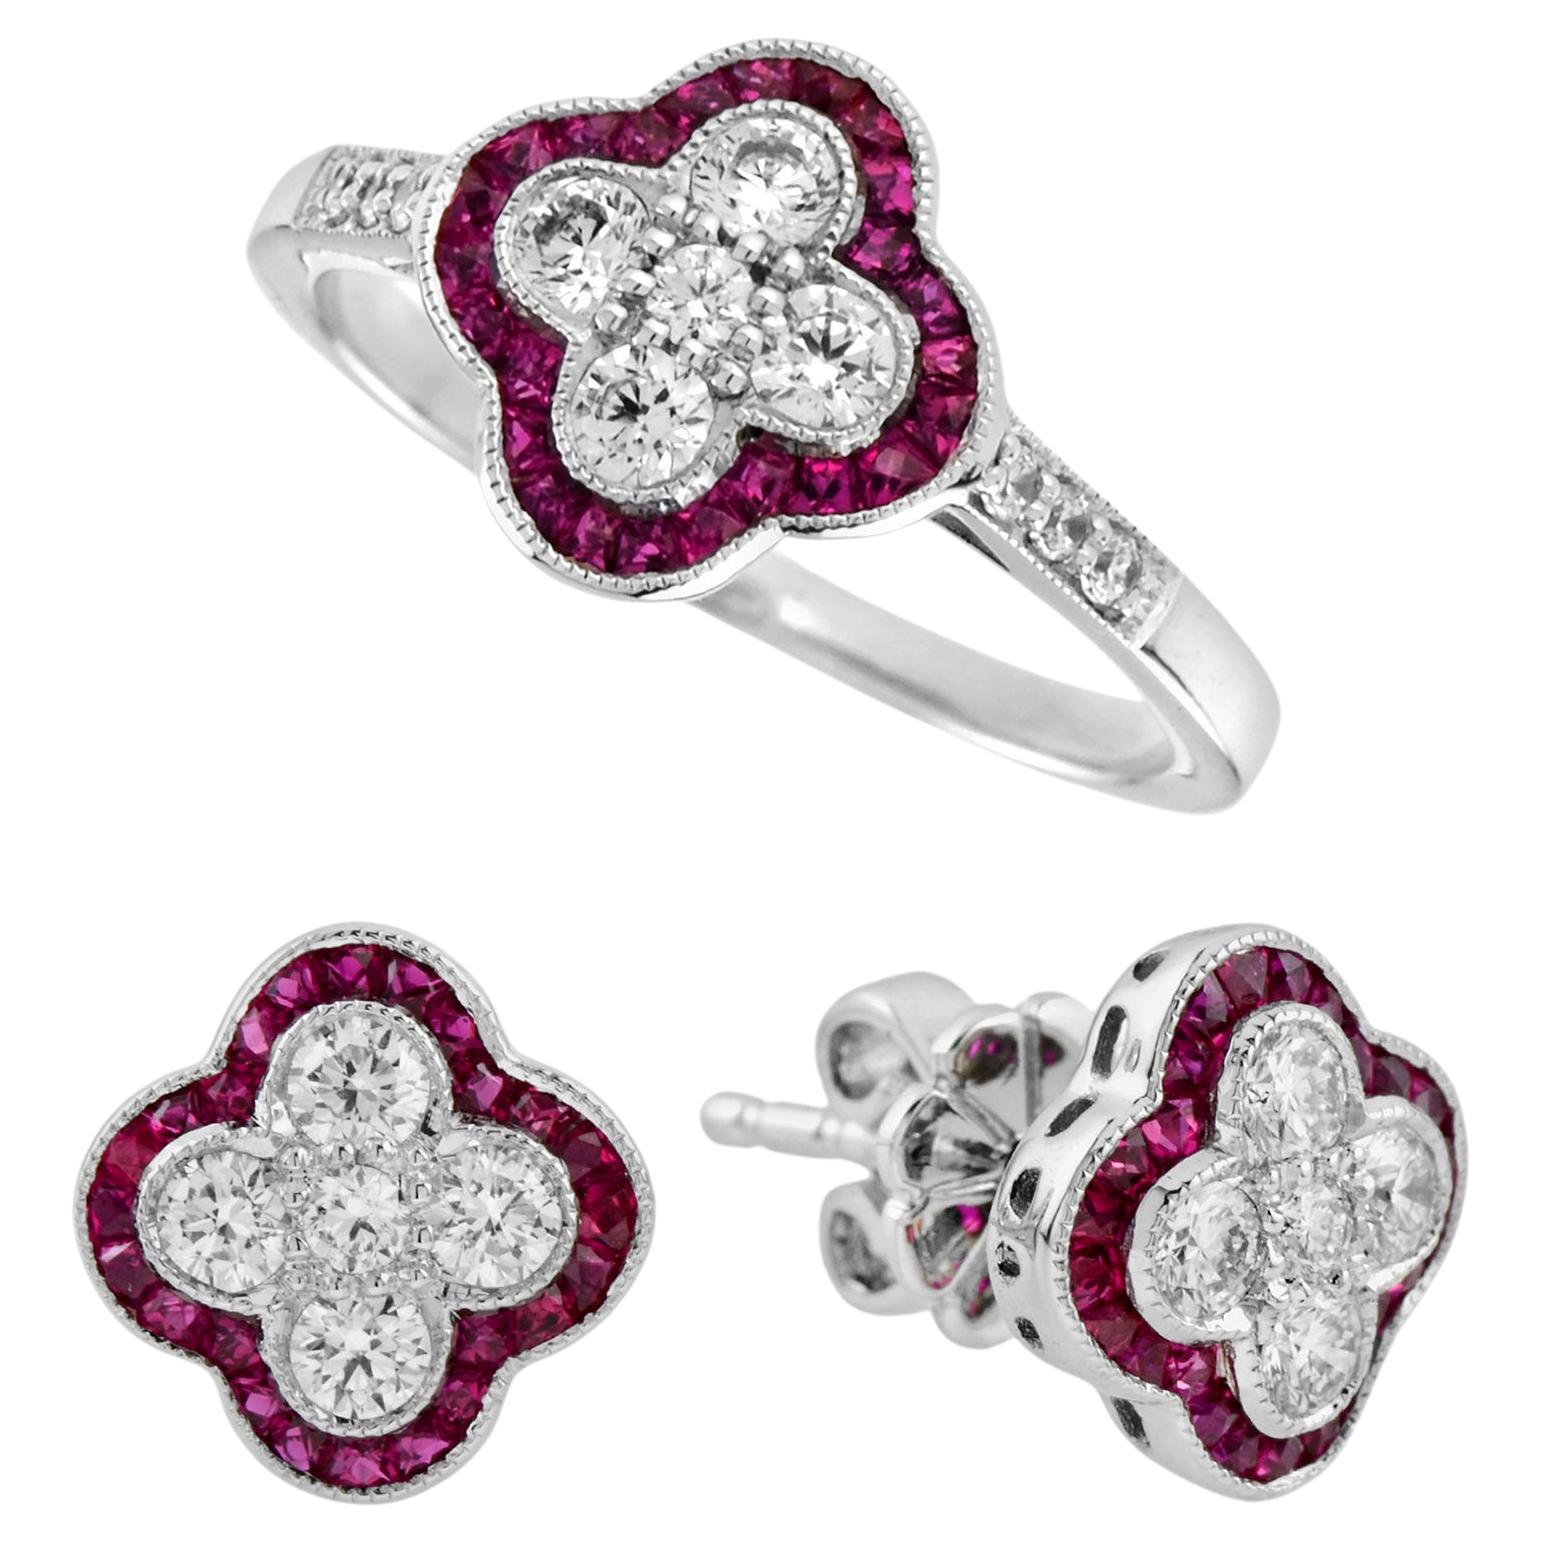 For Sale:  Diamond and Ruby Art Deco Style Floral Cluster Ring & Earring Lover Set